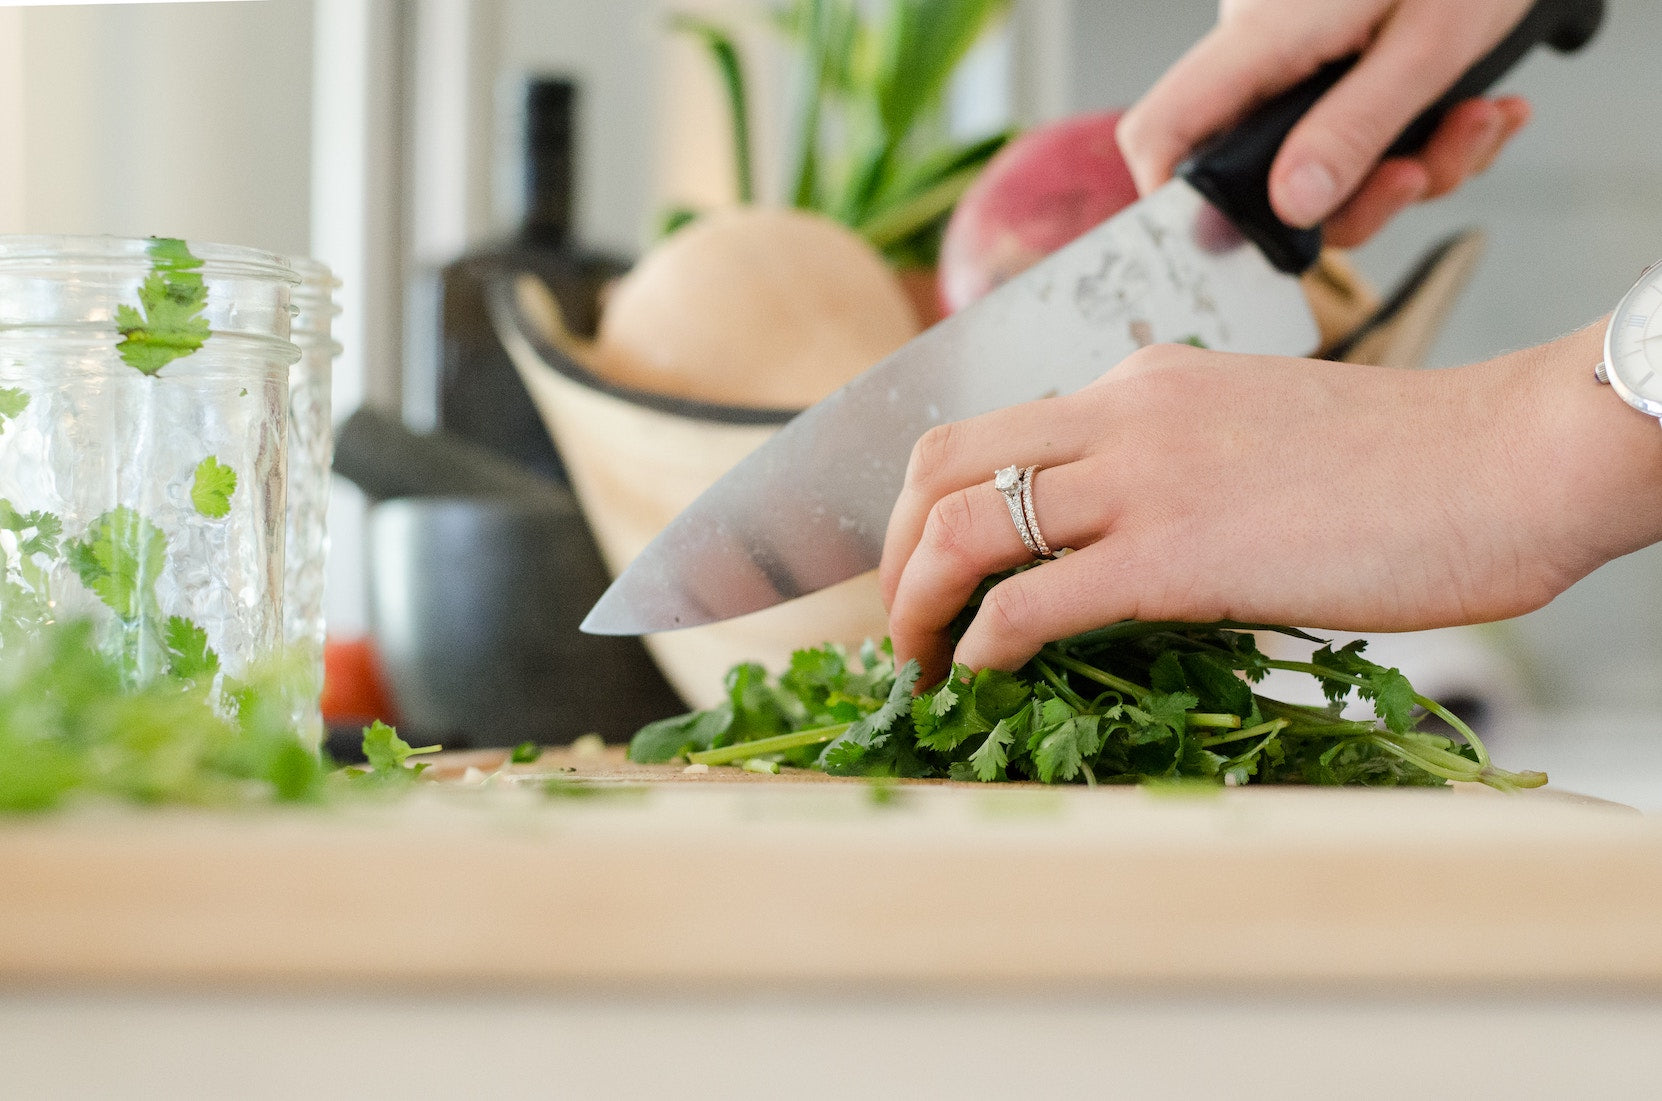 Best kitchen knives: A woman chops cilantro with a chef's knife